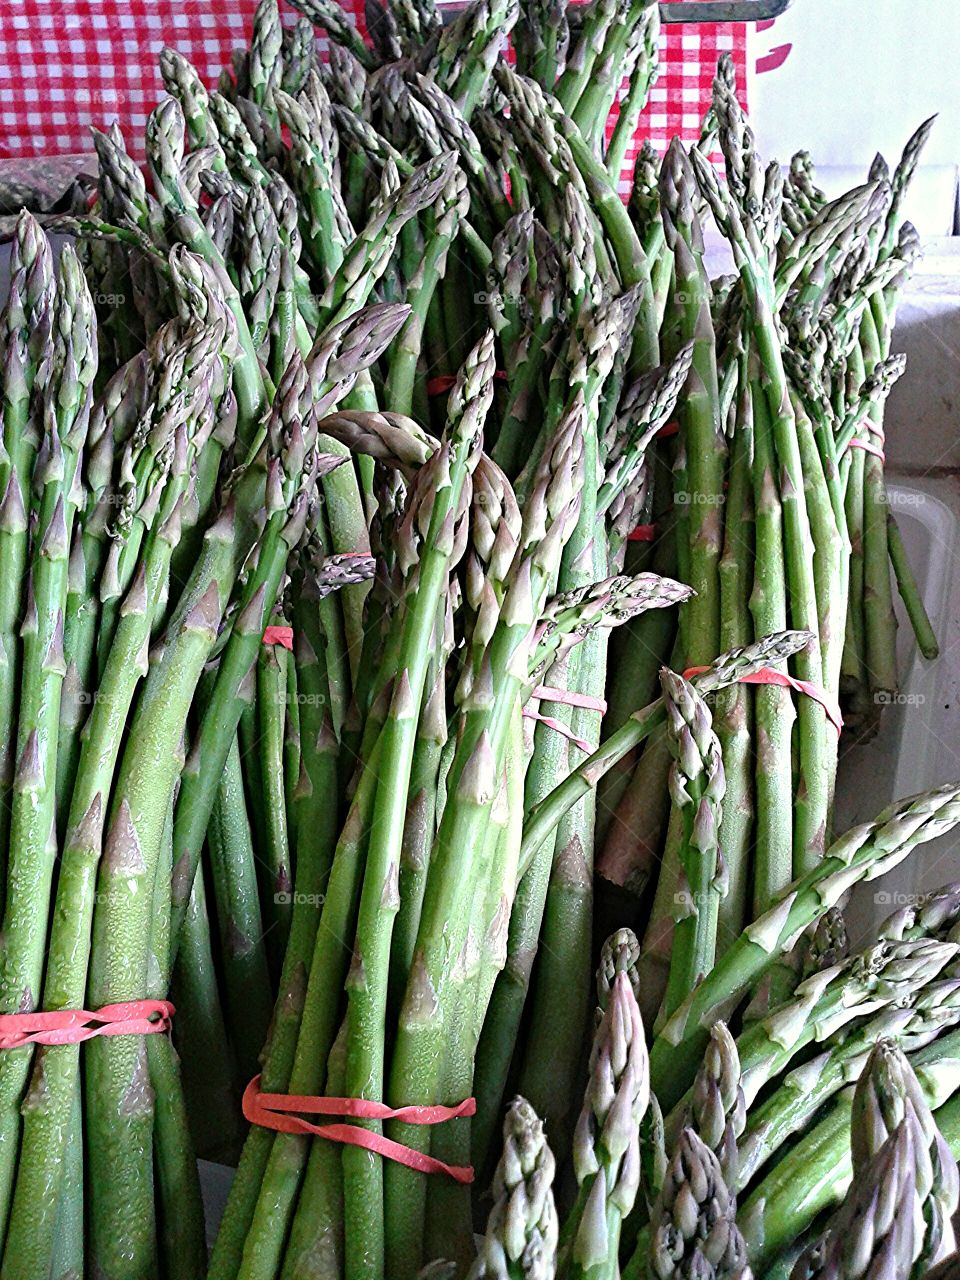 Market Asparagus. The season is short but we savor these delicious stems when we can.